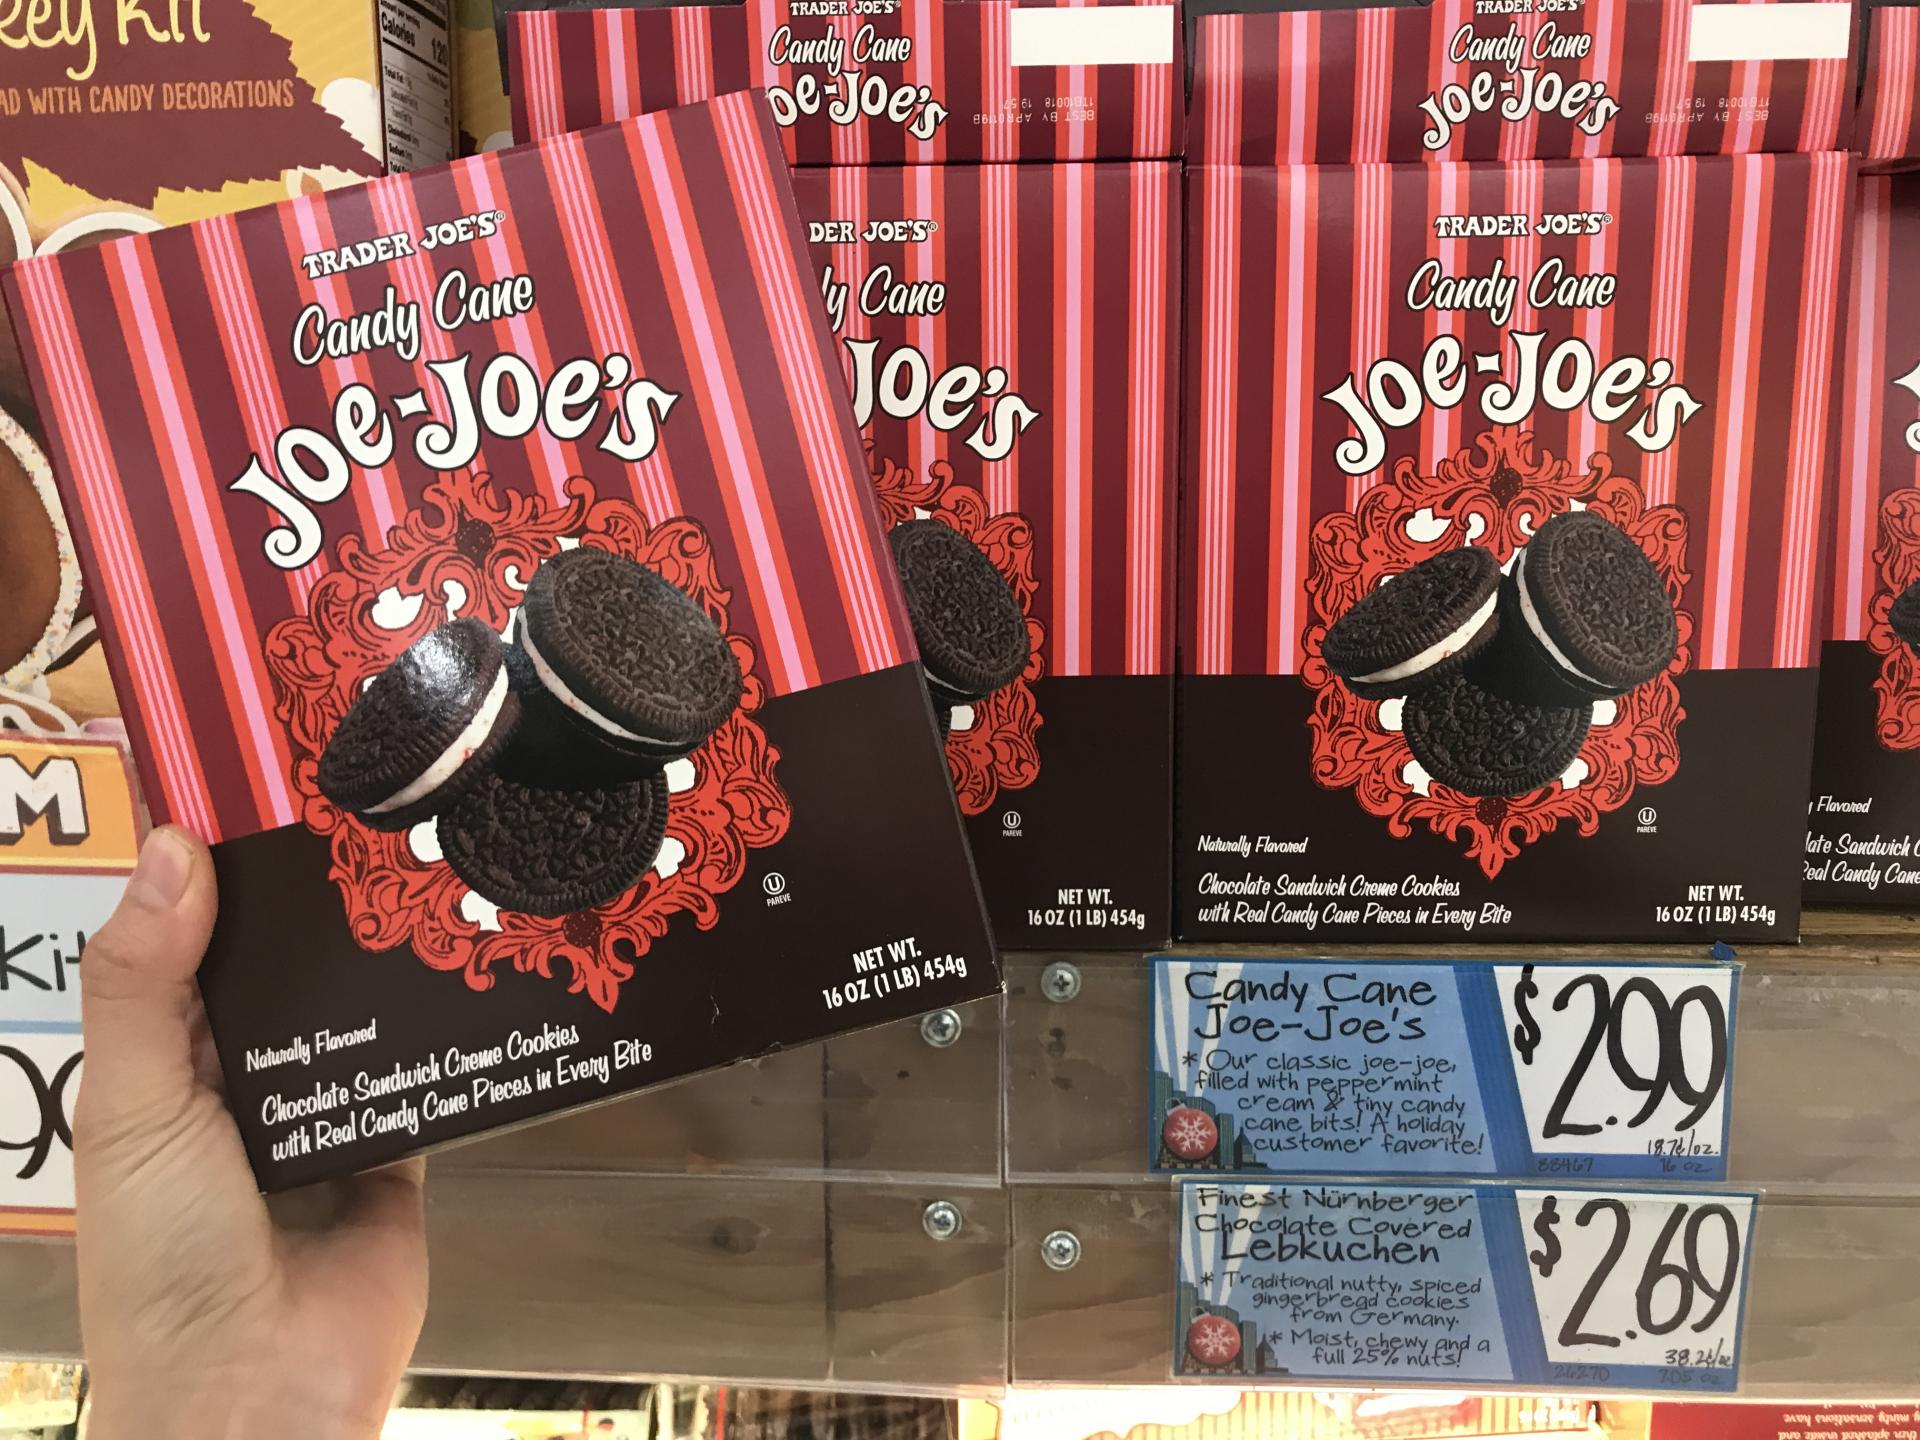 Best Trader Joes holiday products